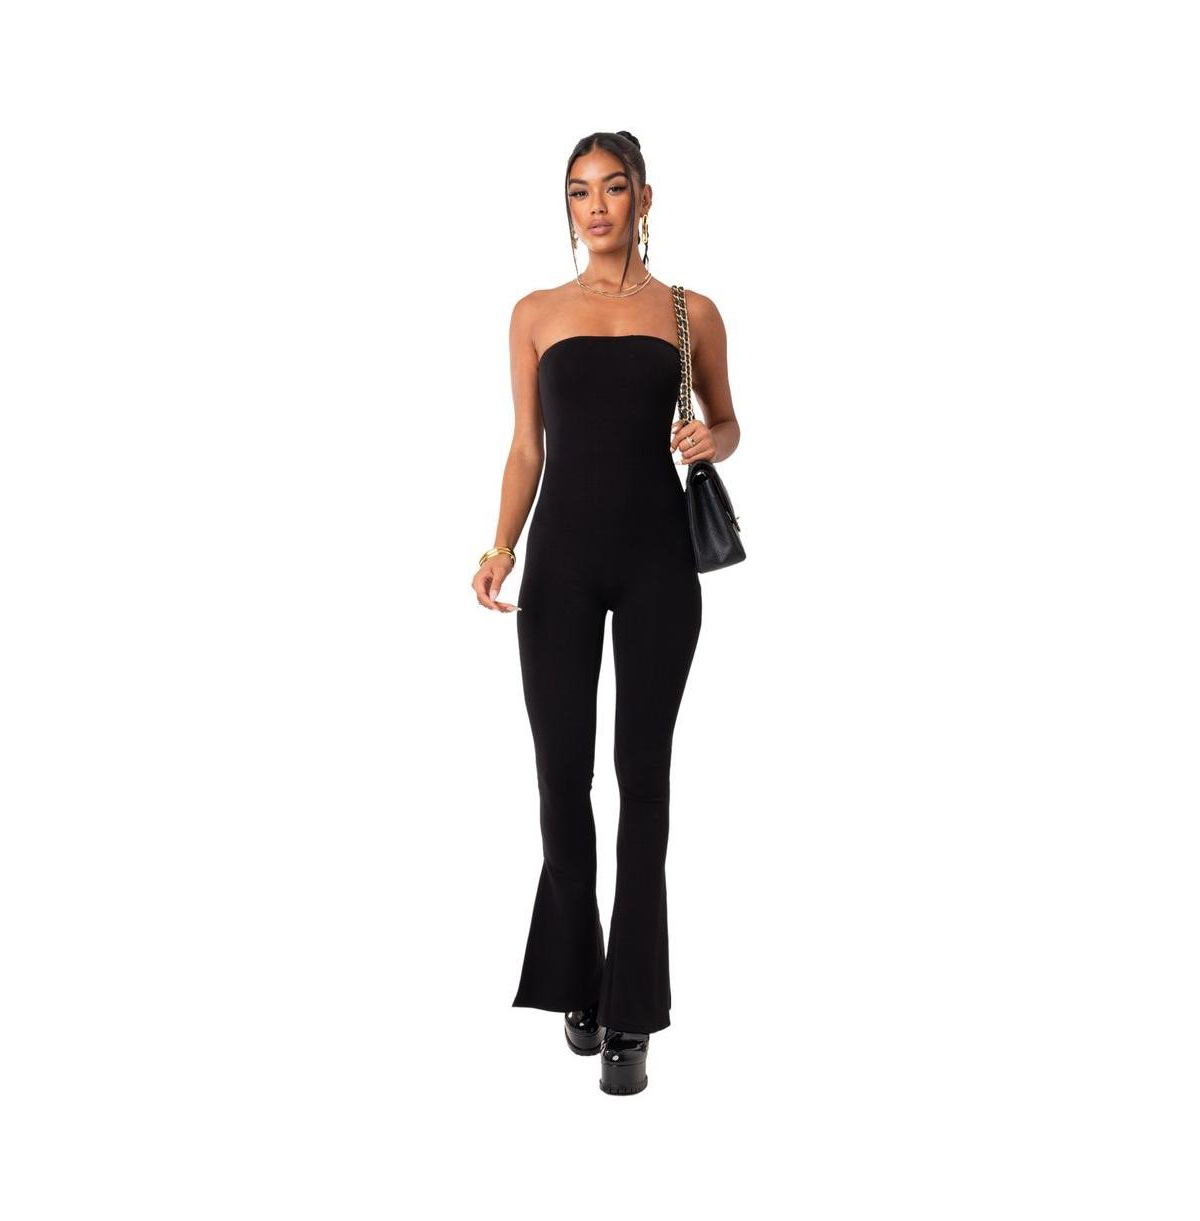 EDIKTED WOMEN'S STRAPLESS FLARED JUMPSUIT WITH SLITS